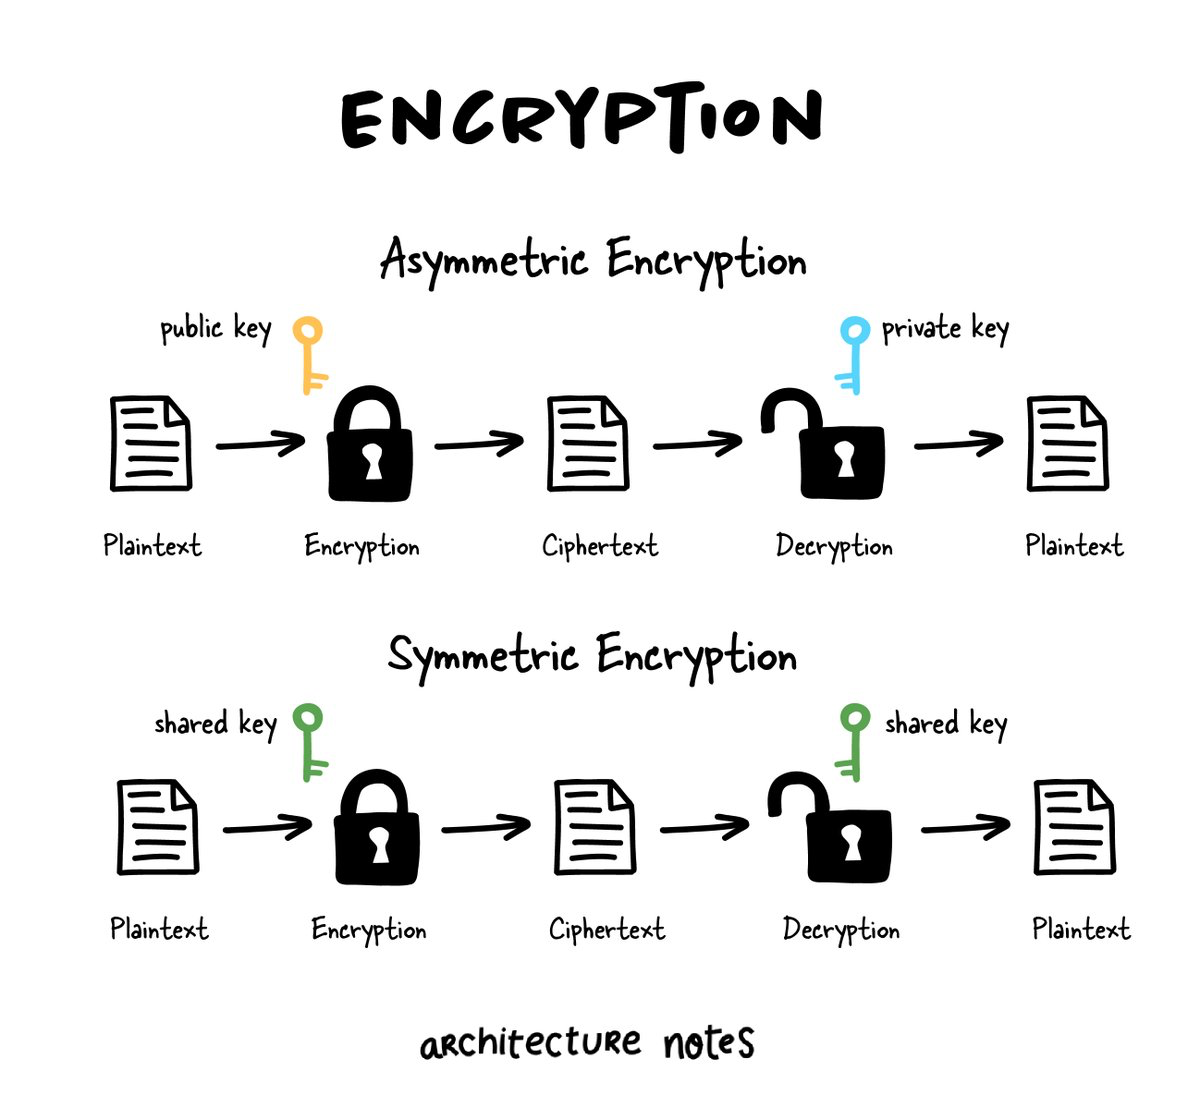 Classes of Encryption